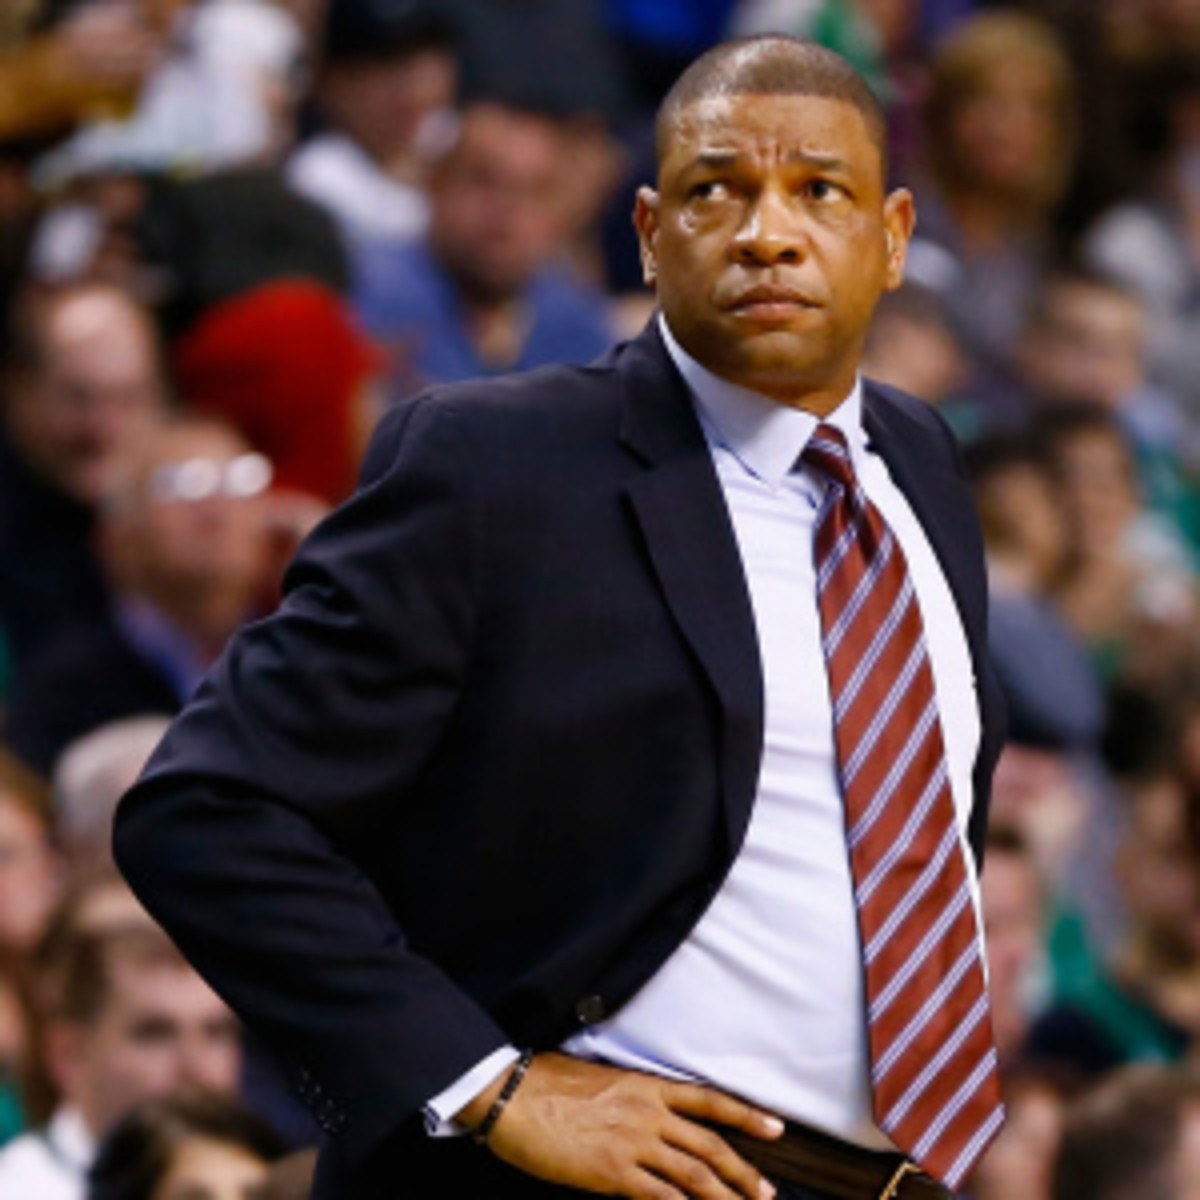 Doc Rivers was on his way to the Boston Marathon finish line when the bombs exploded. (Jared Wickerham/Getty Images)